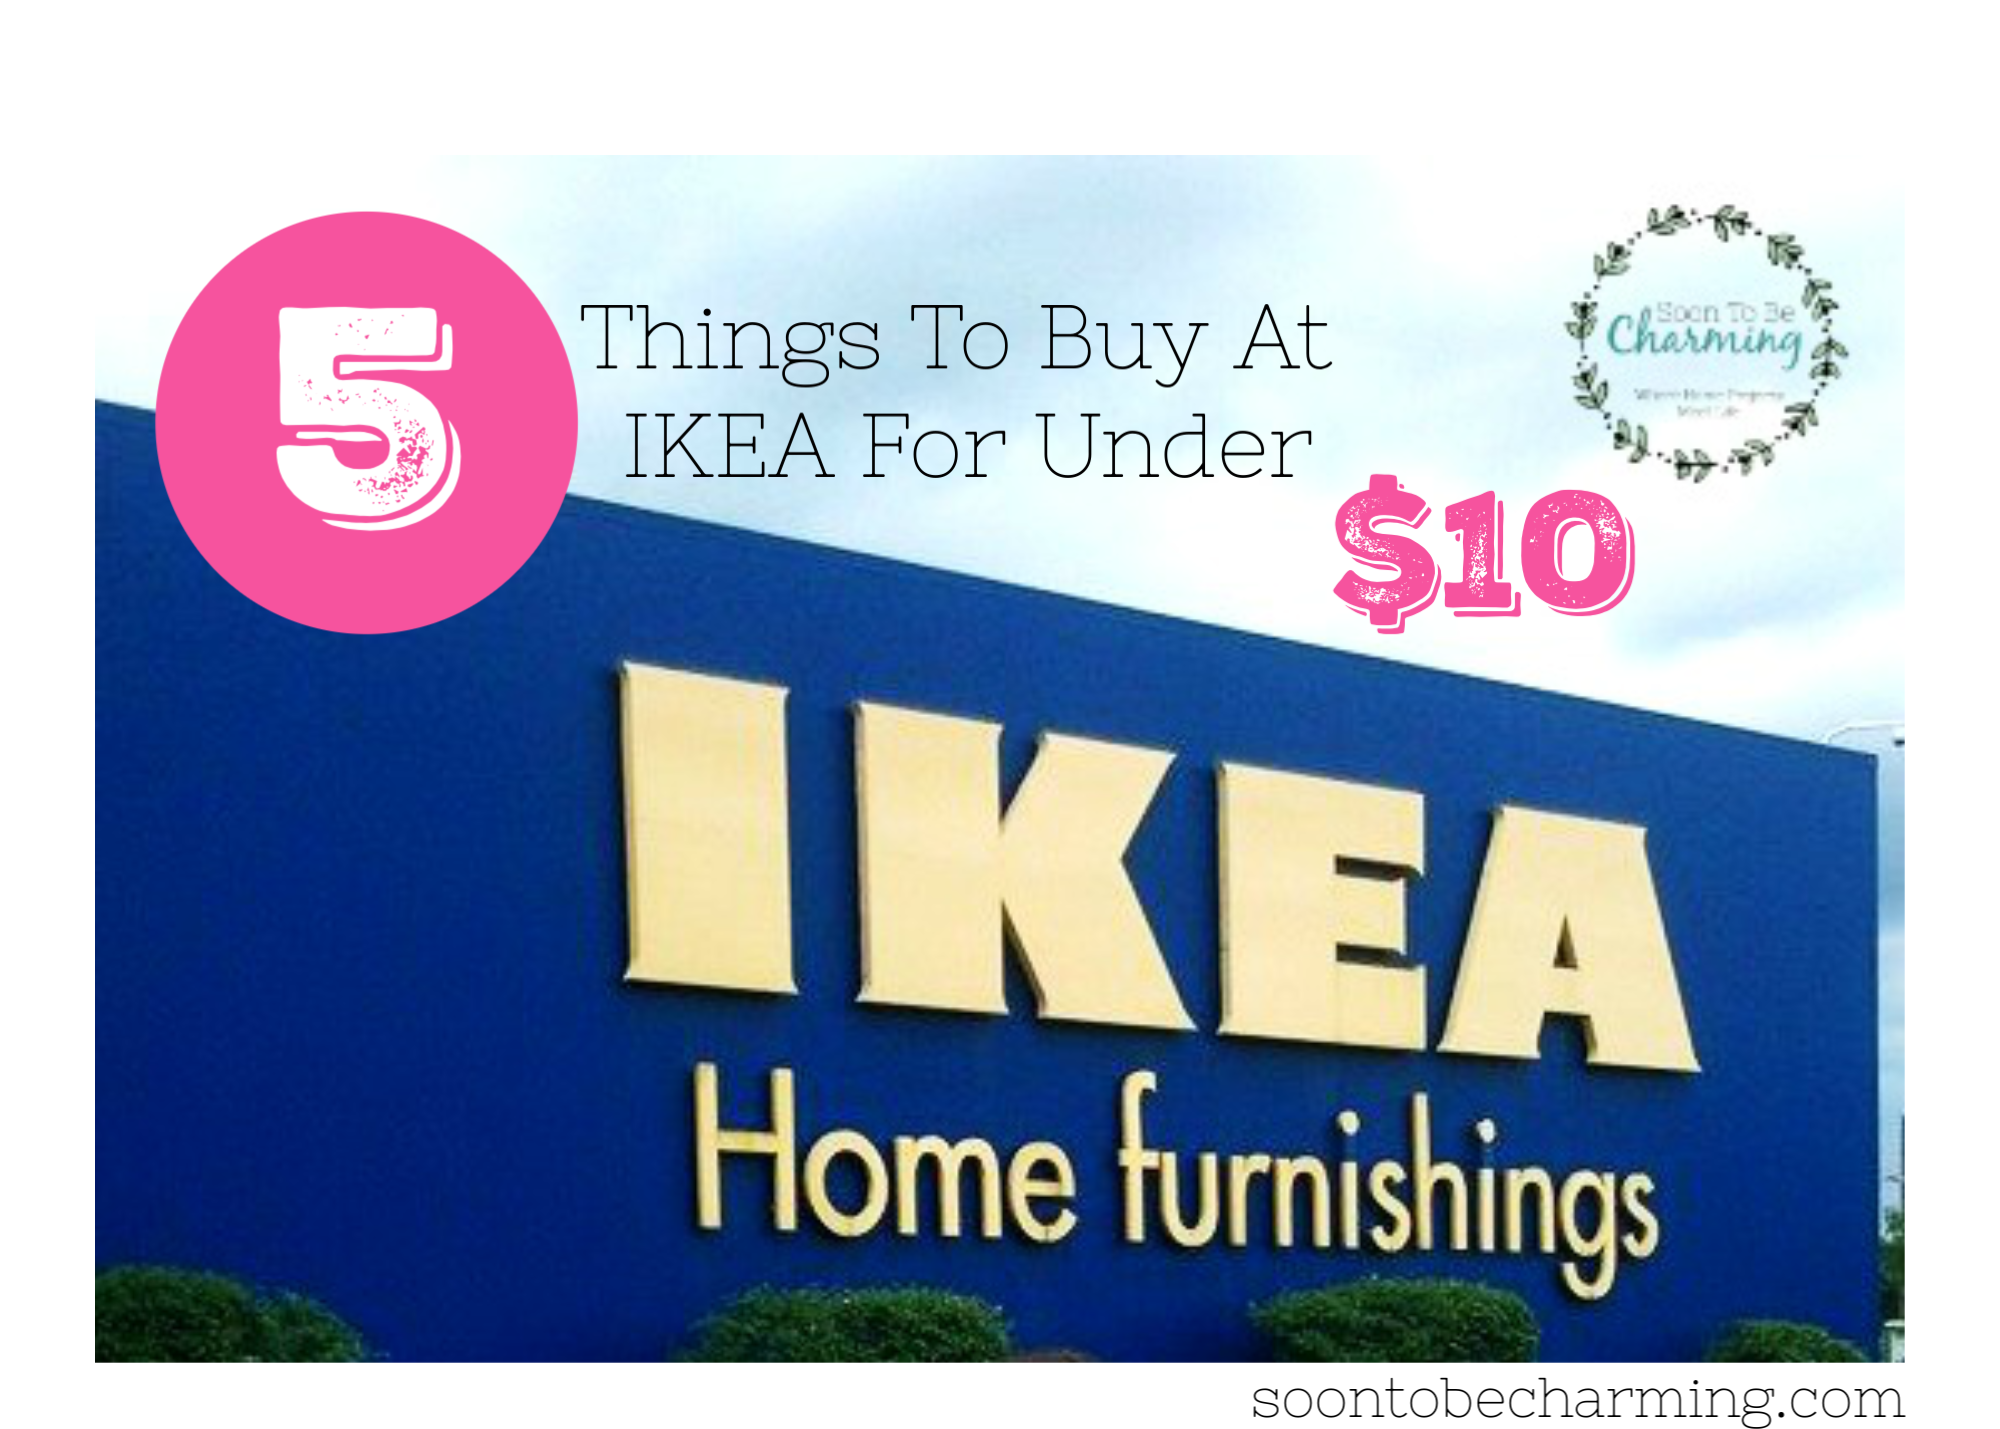 5 Things To Buy At IKEA For Under $10